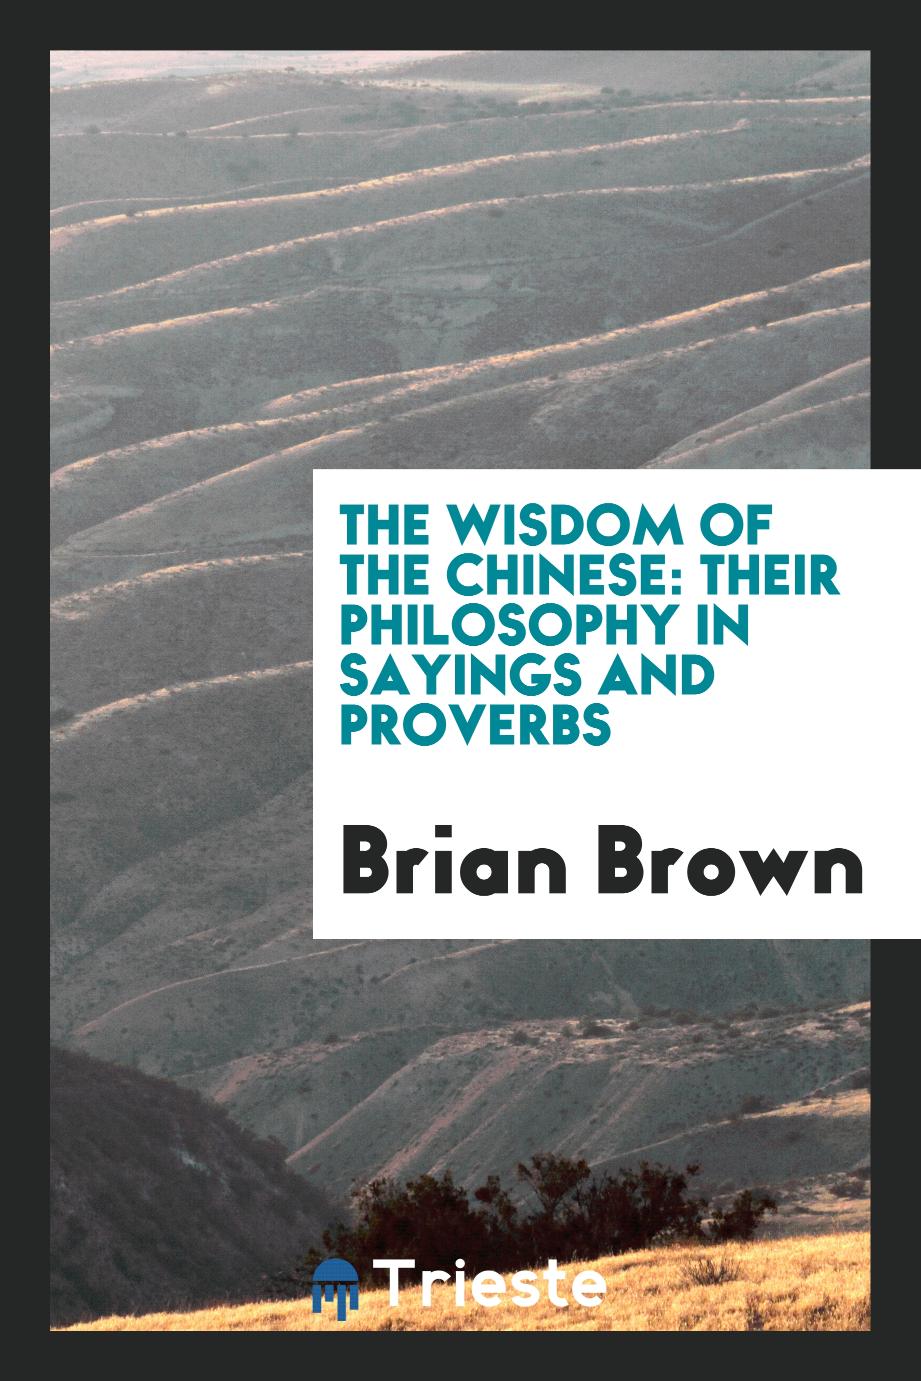 The wisdom of the Chinese: their philosophy in sayings and proverbs